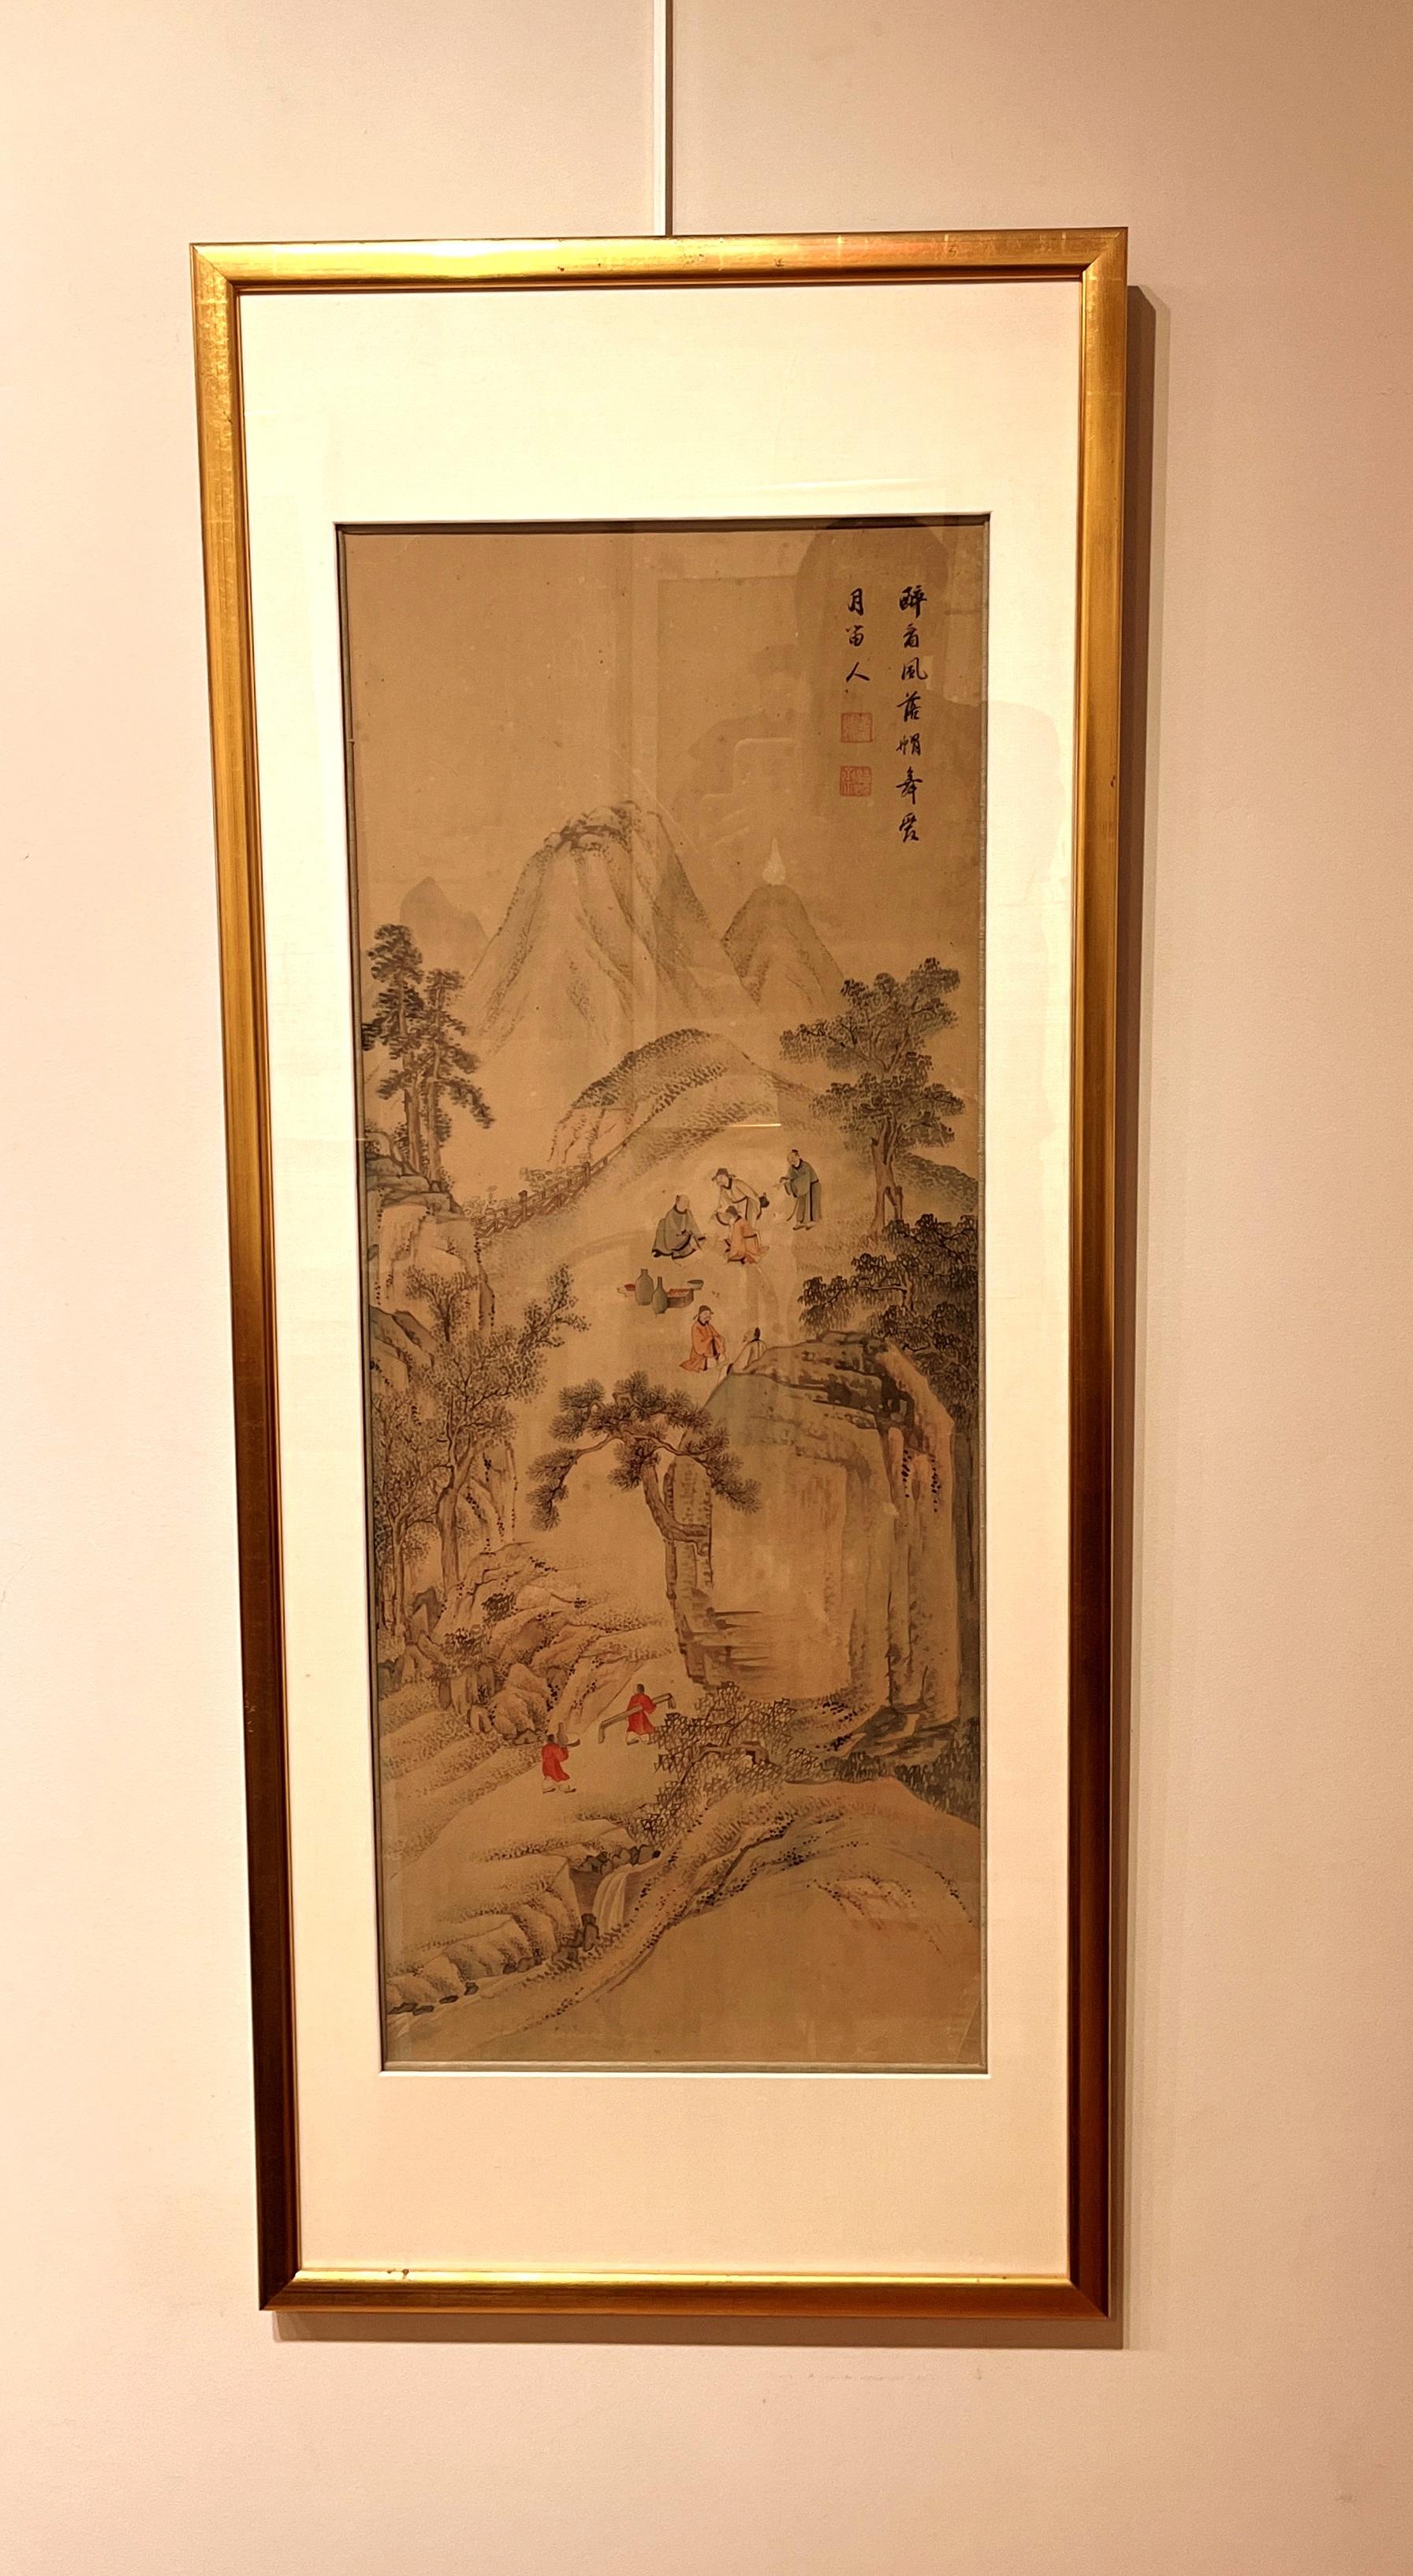 An elegant Chinese brush painting of landscape, scholars practicing arts in the mountains, 19th century
ink and color on paper
Conservation framed
Overall size:  46.5